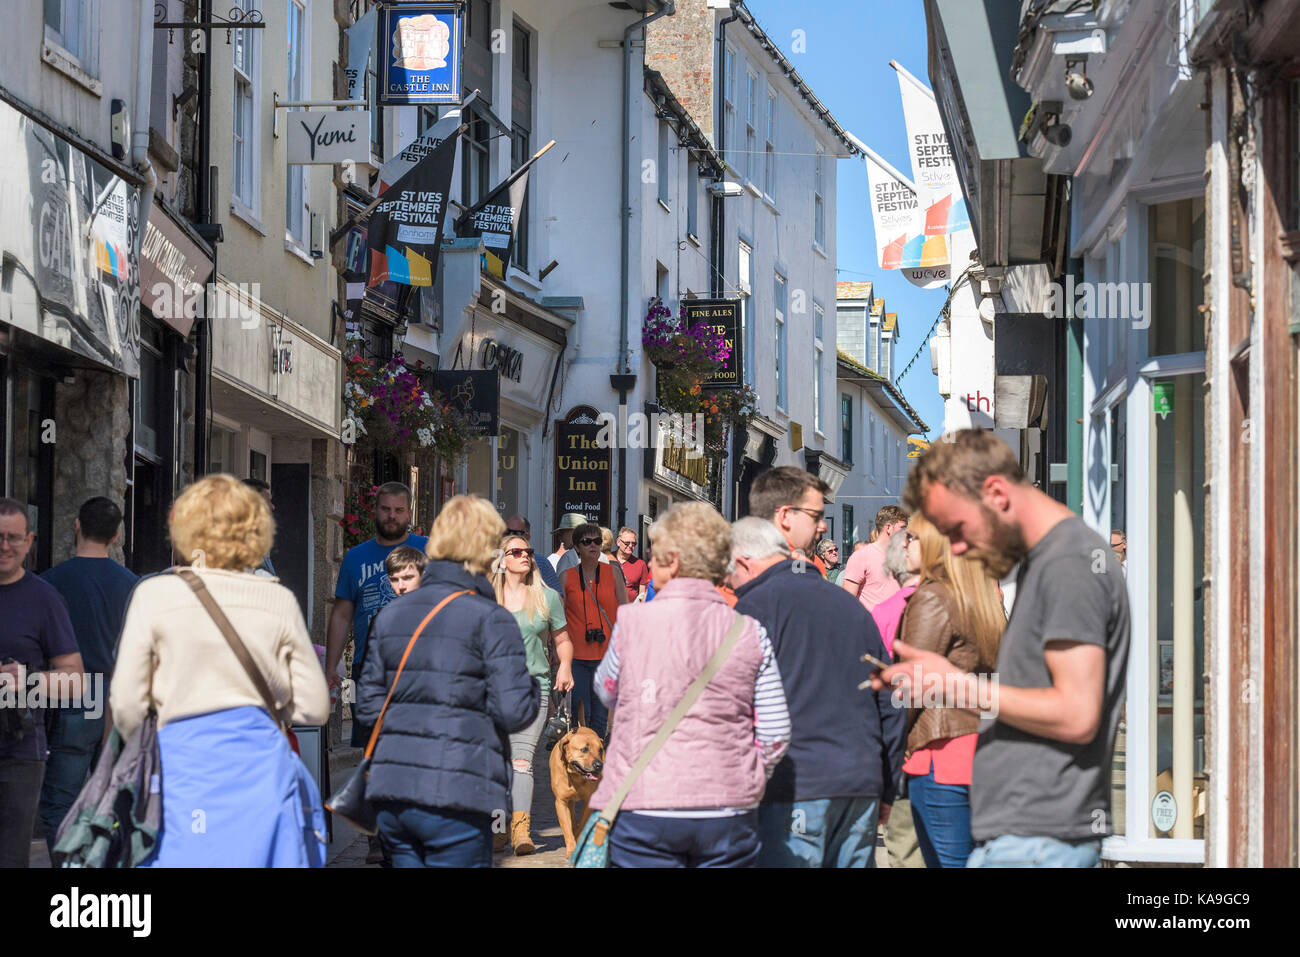 St Ives - a busy street scene in the picturesque St Ives town centre in Cornwall. Stock Photo